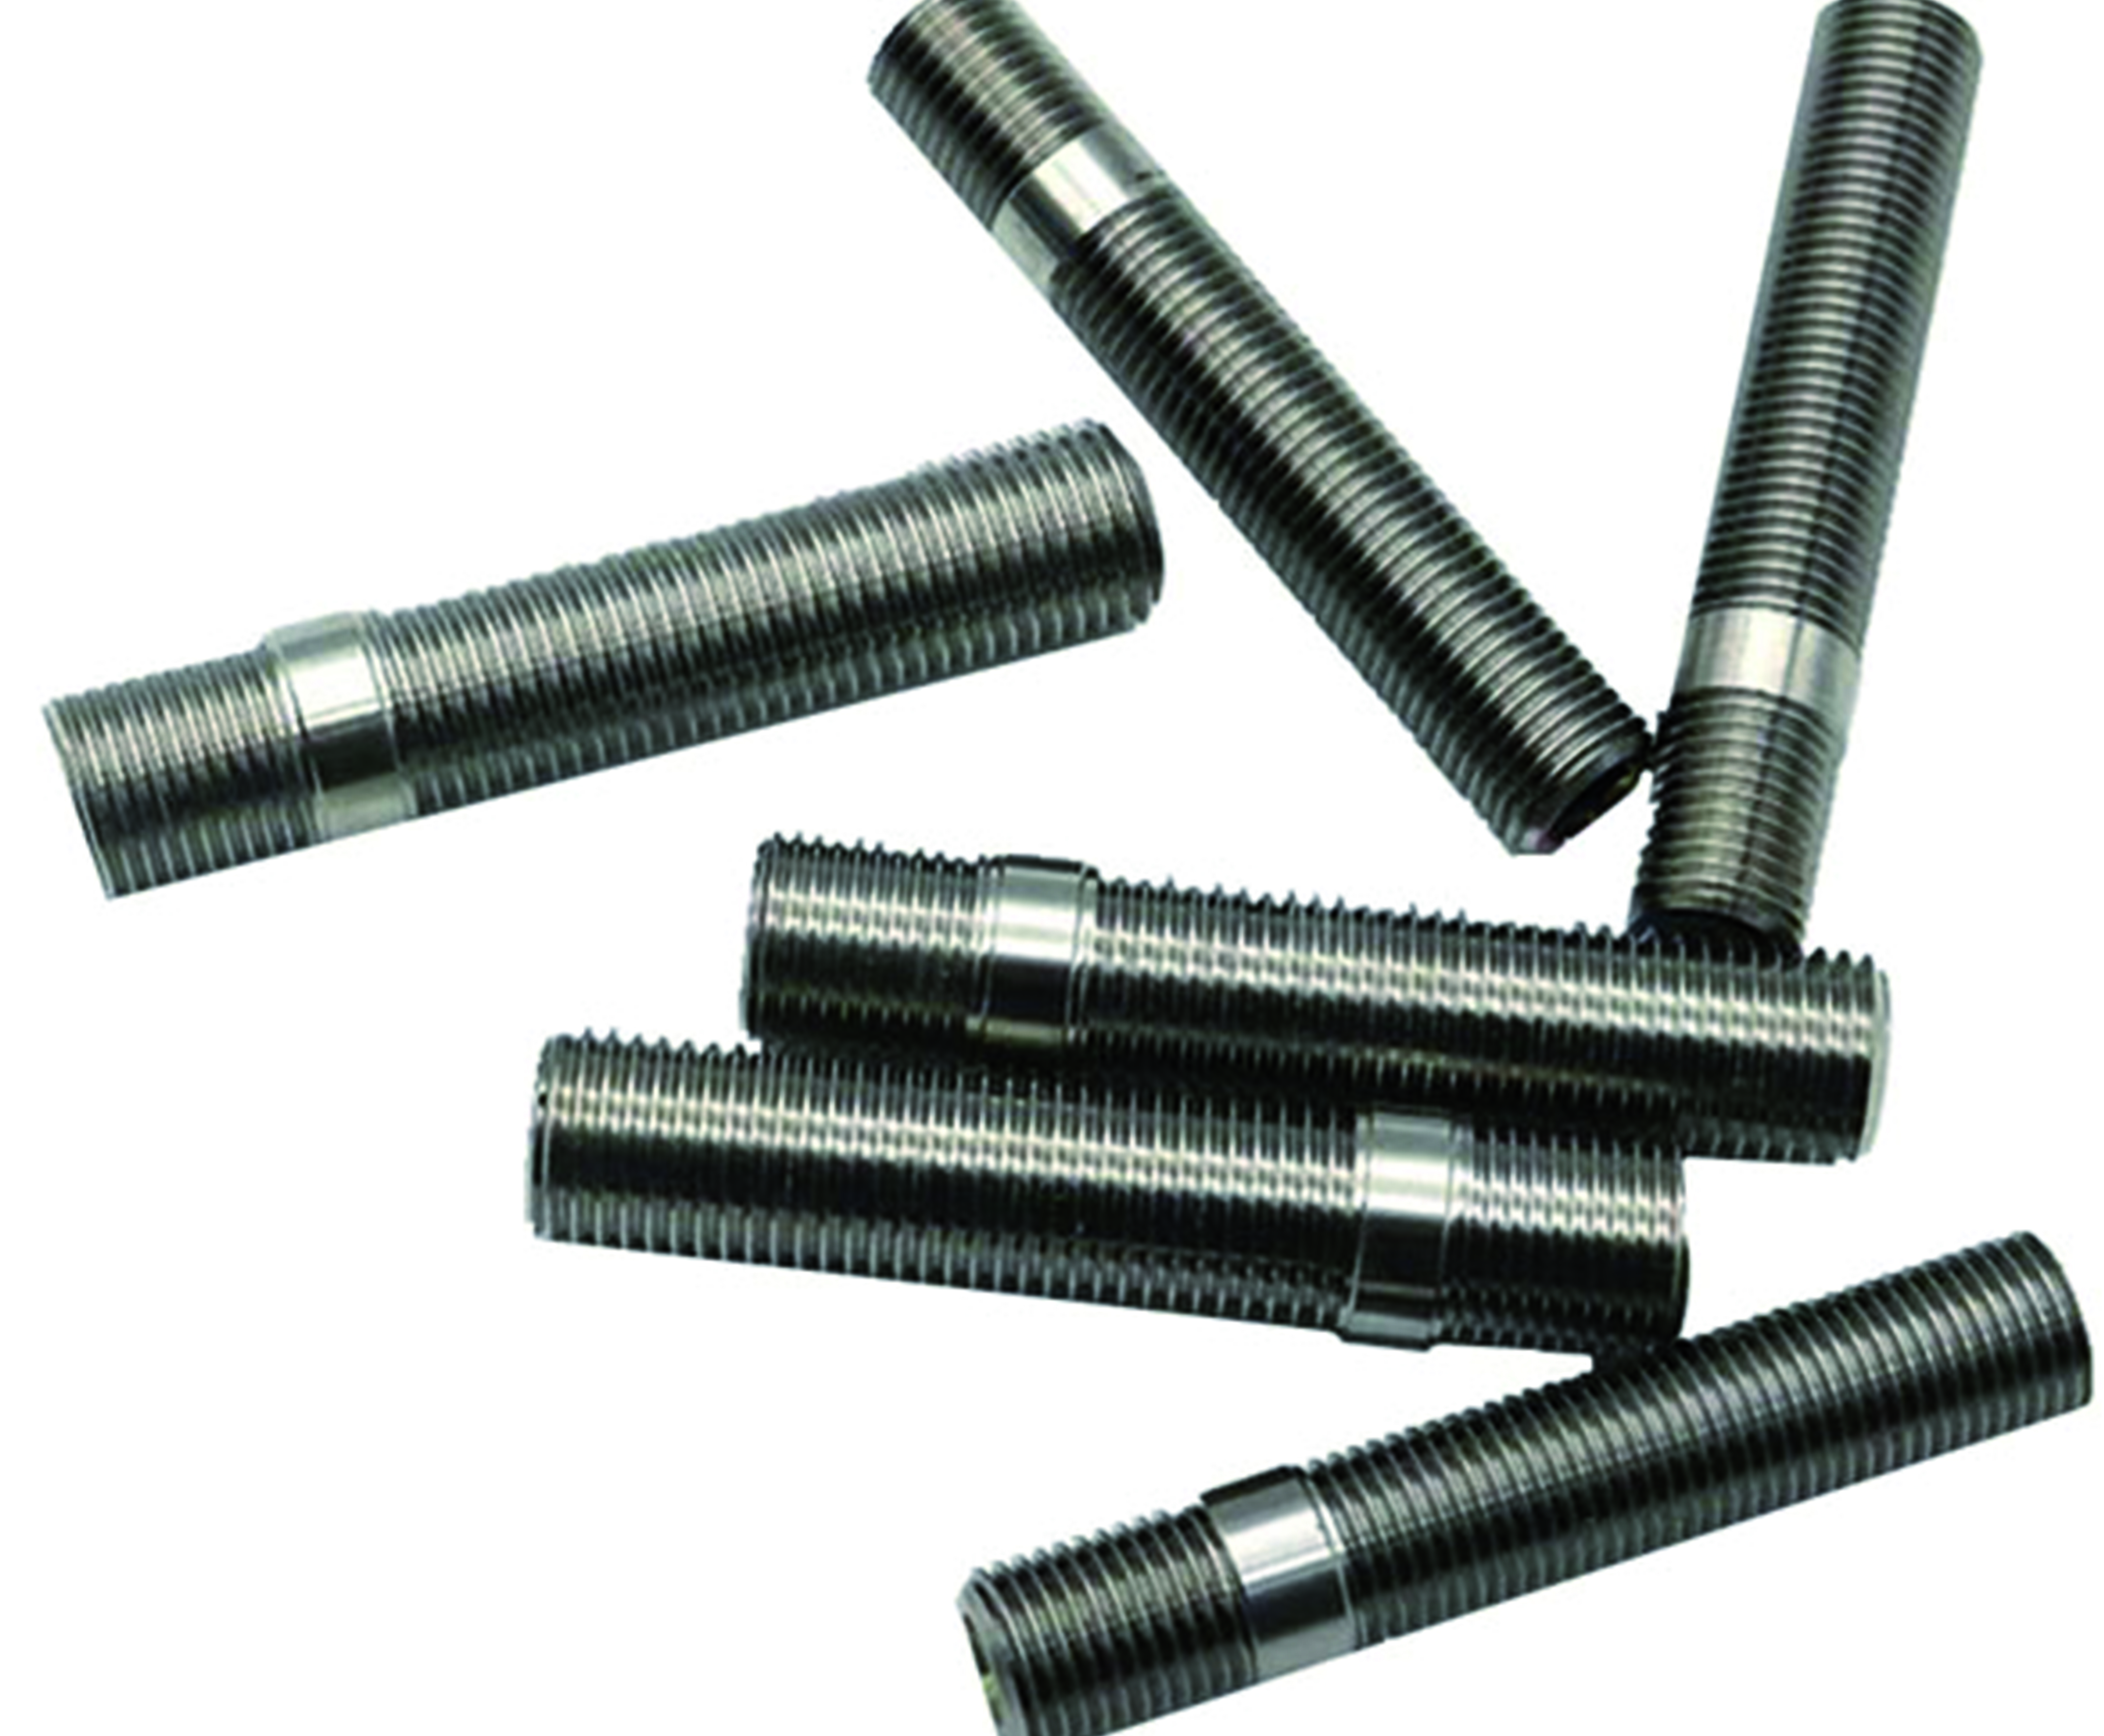 Designing & Manufacturing Bolts